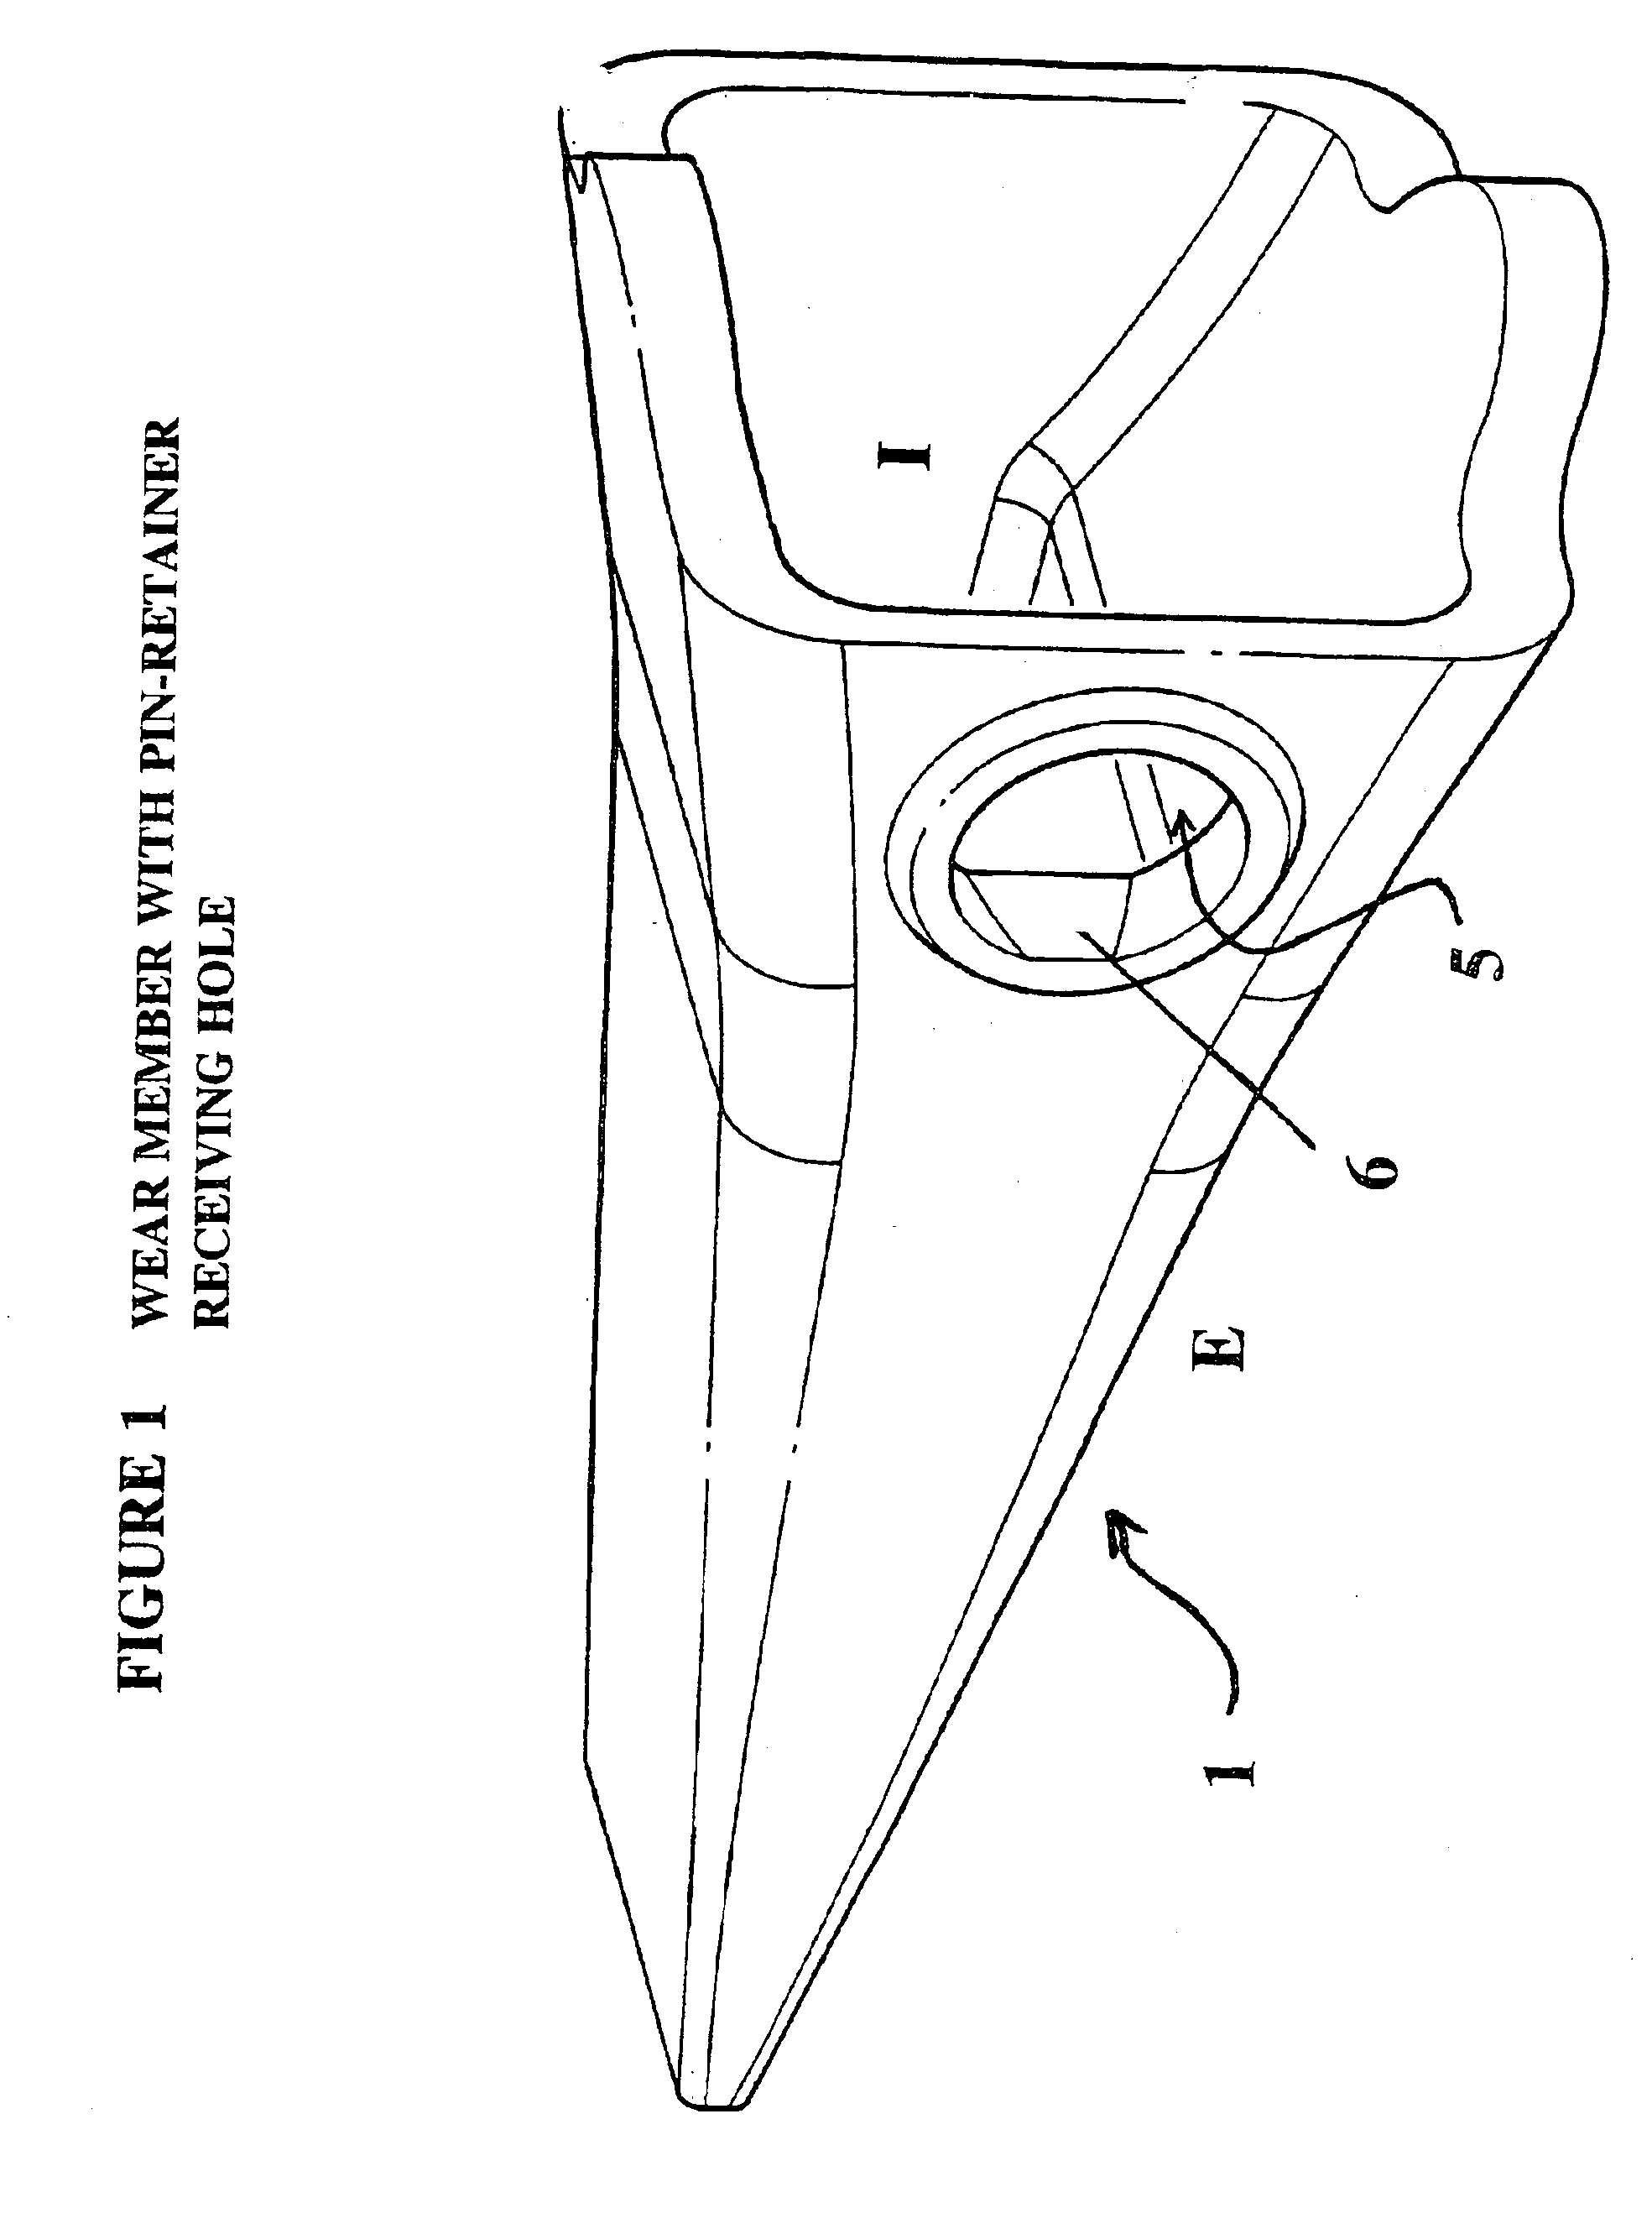 Torque locking system for fastening a wear member to a support structure